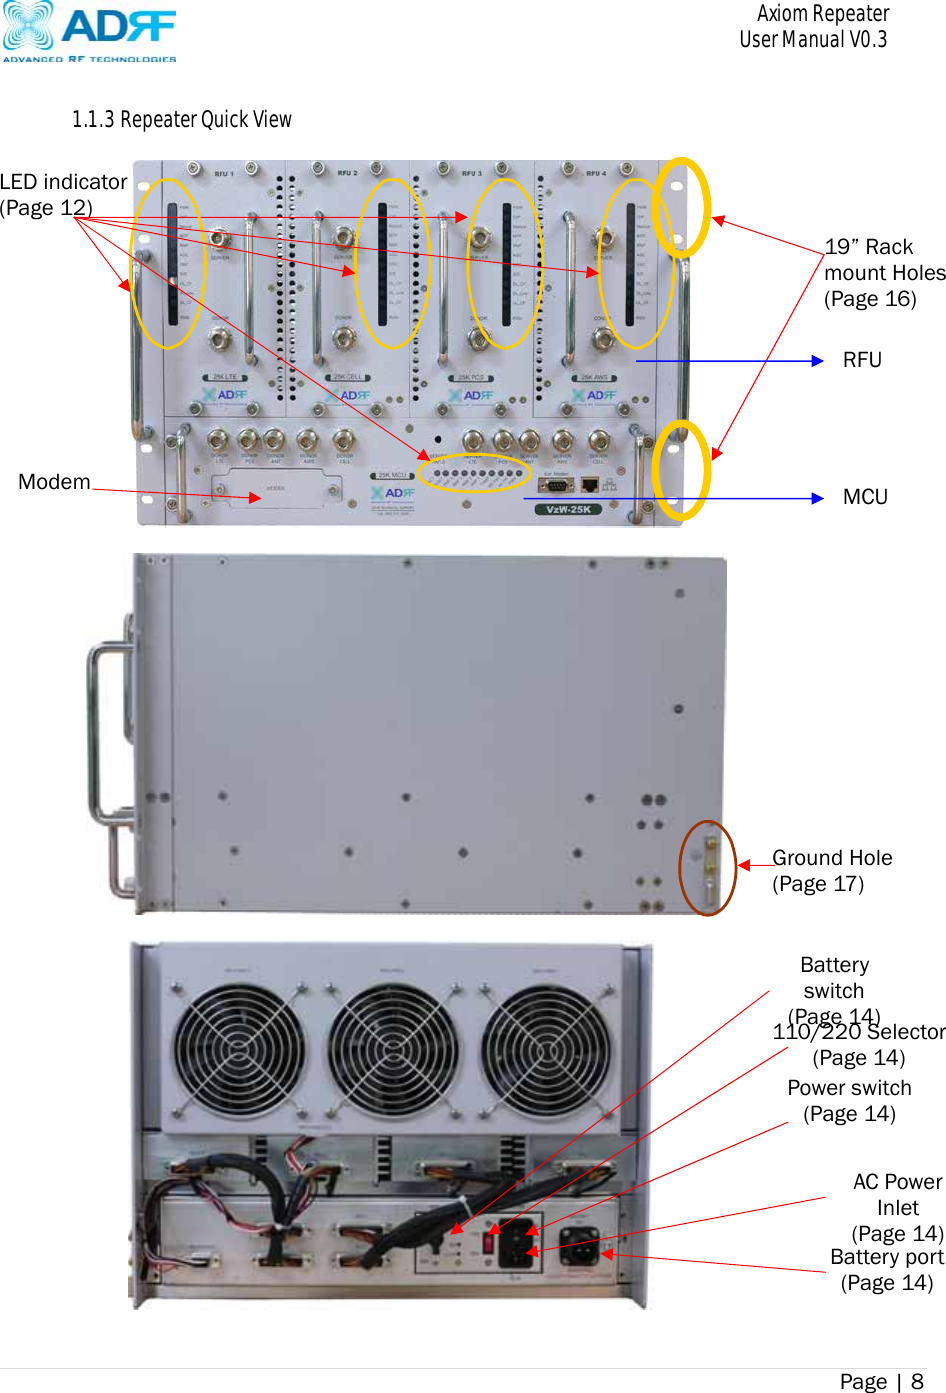       Axiom Repeater     User Manual V0.3 Page | 8     1.1.3 Repeater Quick View              Ground Hole(Page 17) LED indicator (Page 12) Modem 19” Rack mount Holes (Page 16) RFU MCU Batteryswitch (Page 14) Power switch(Page 14) AC Power Inlet (Page 14) Battery port(Page 14) 110/220 Selector(Page 14) 